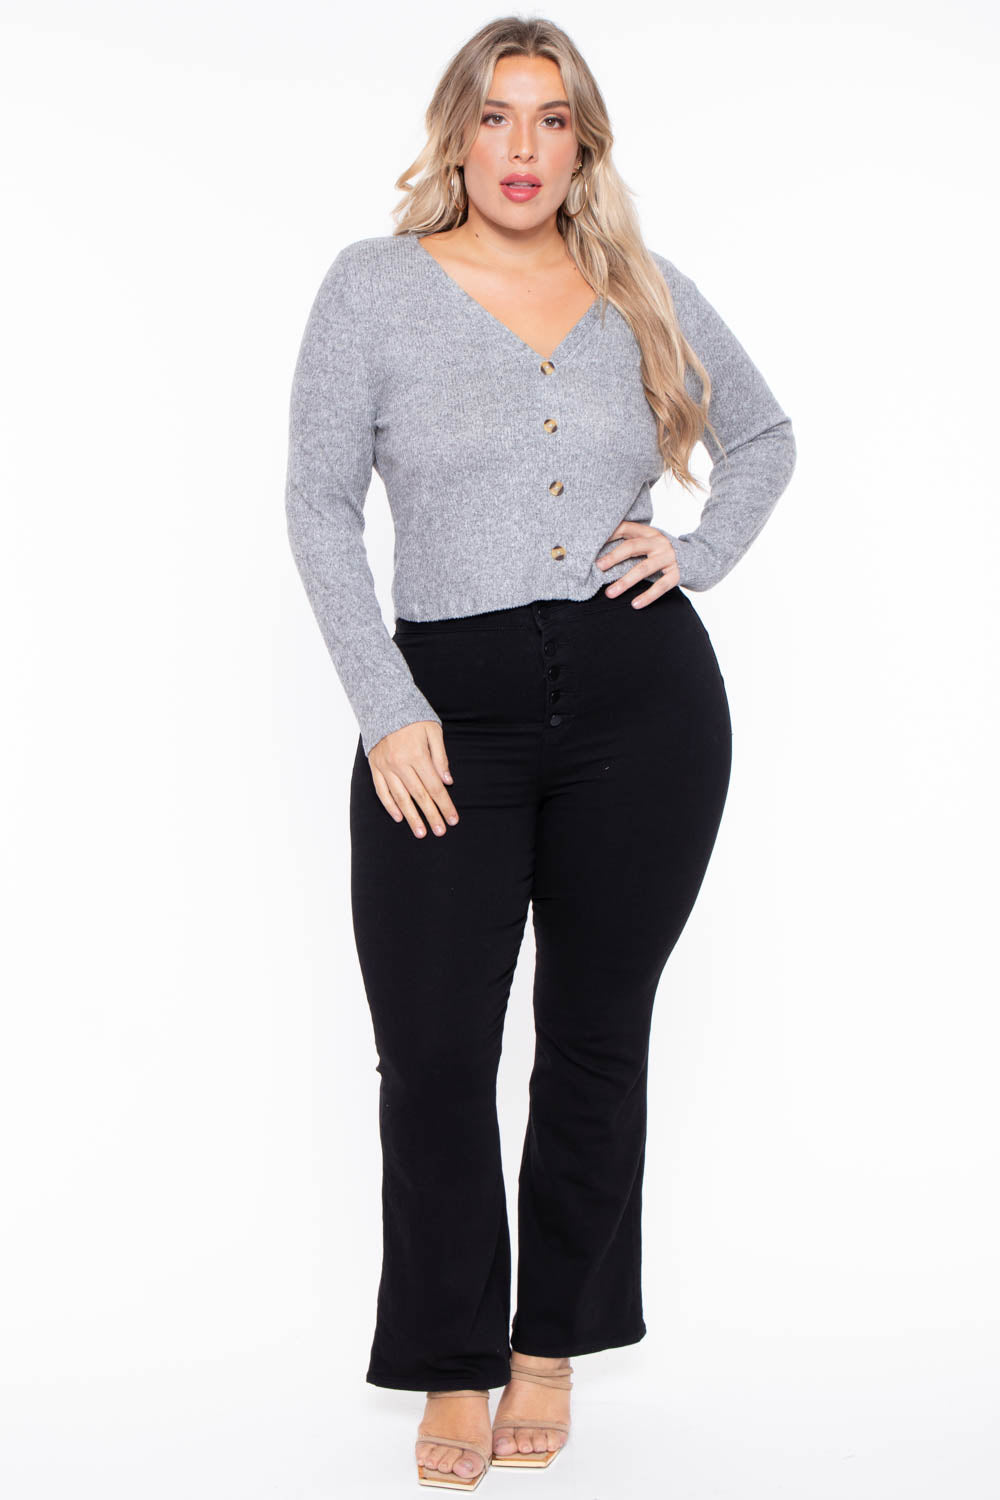 Ambiance Sweaters & Cardigans Plus Size Delaney Sweater - Gray